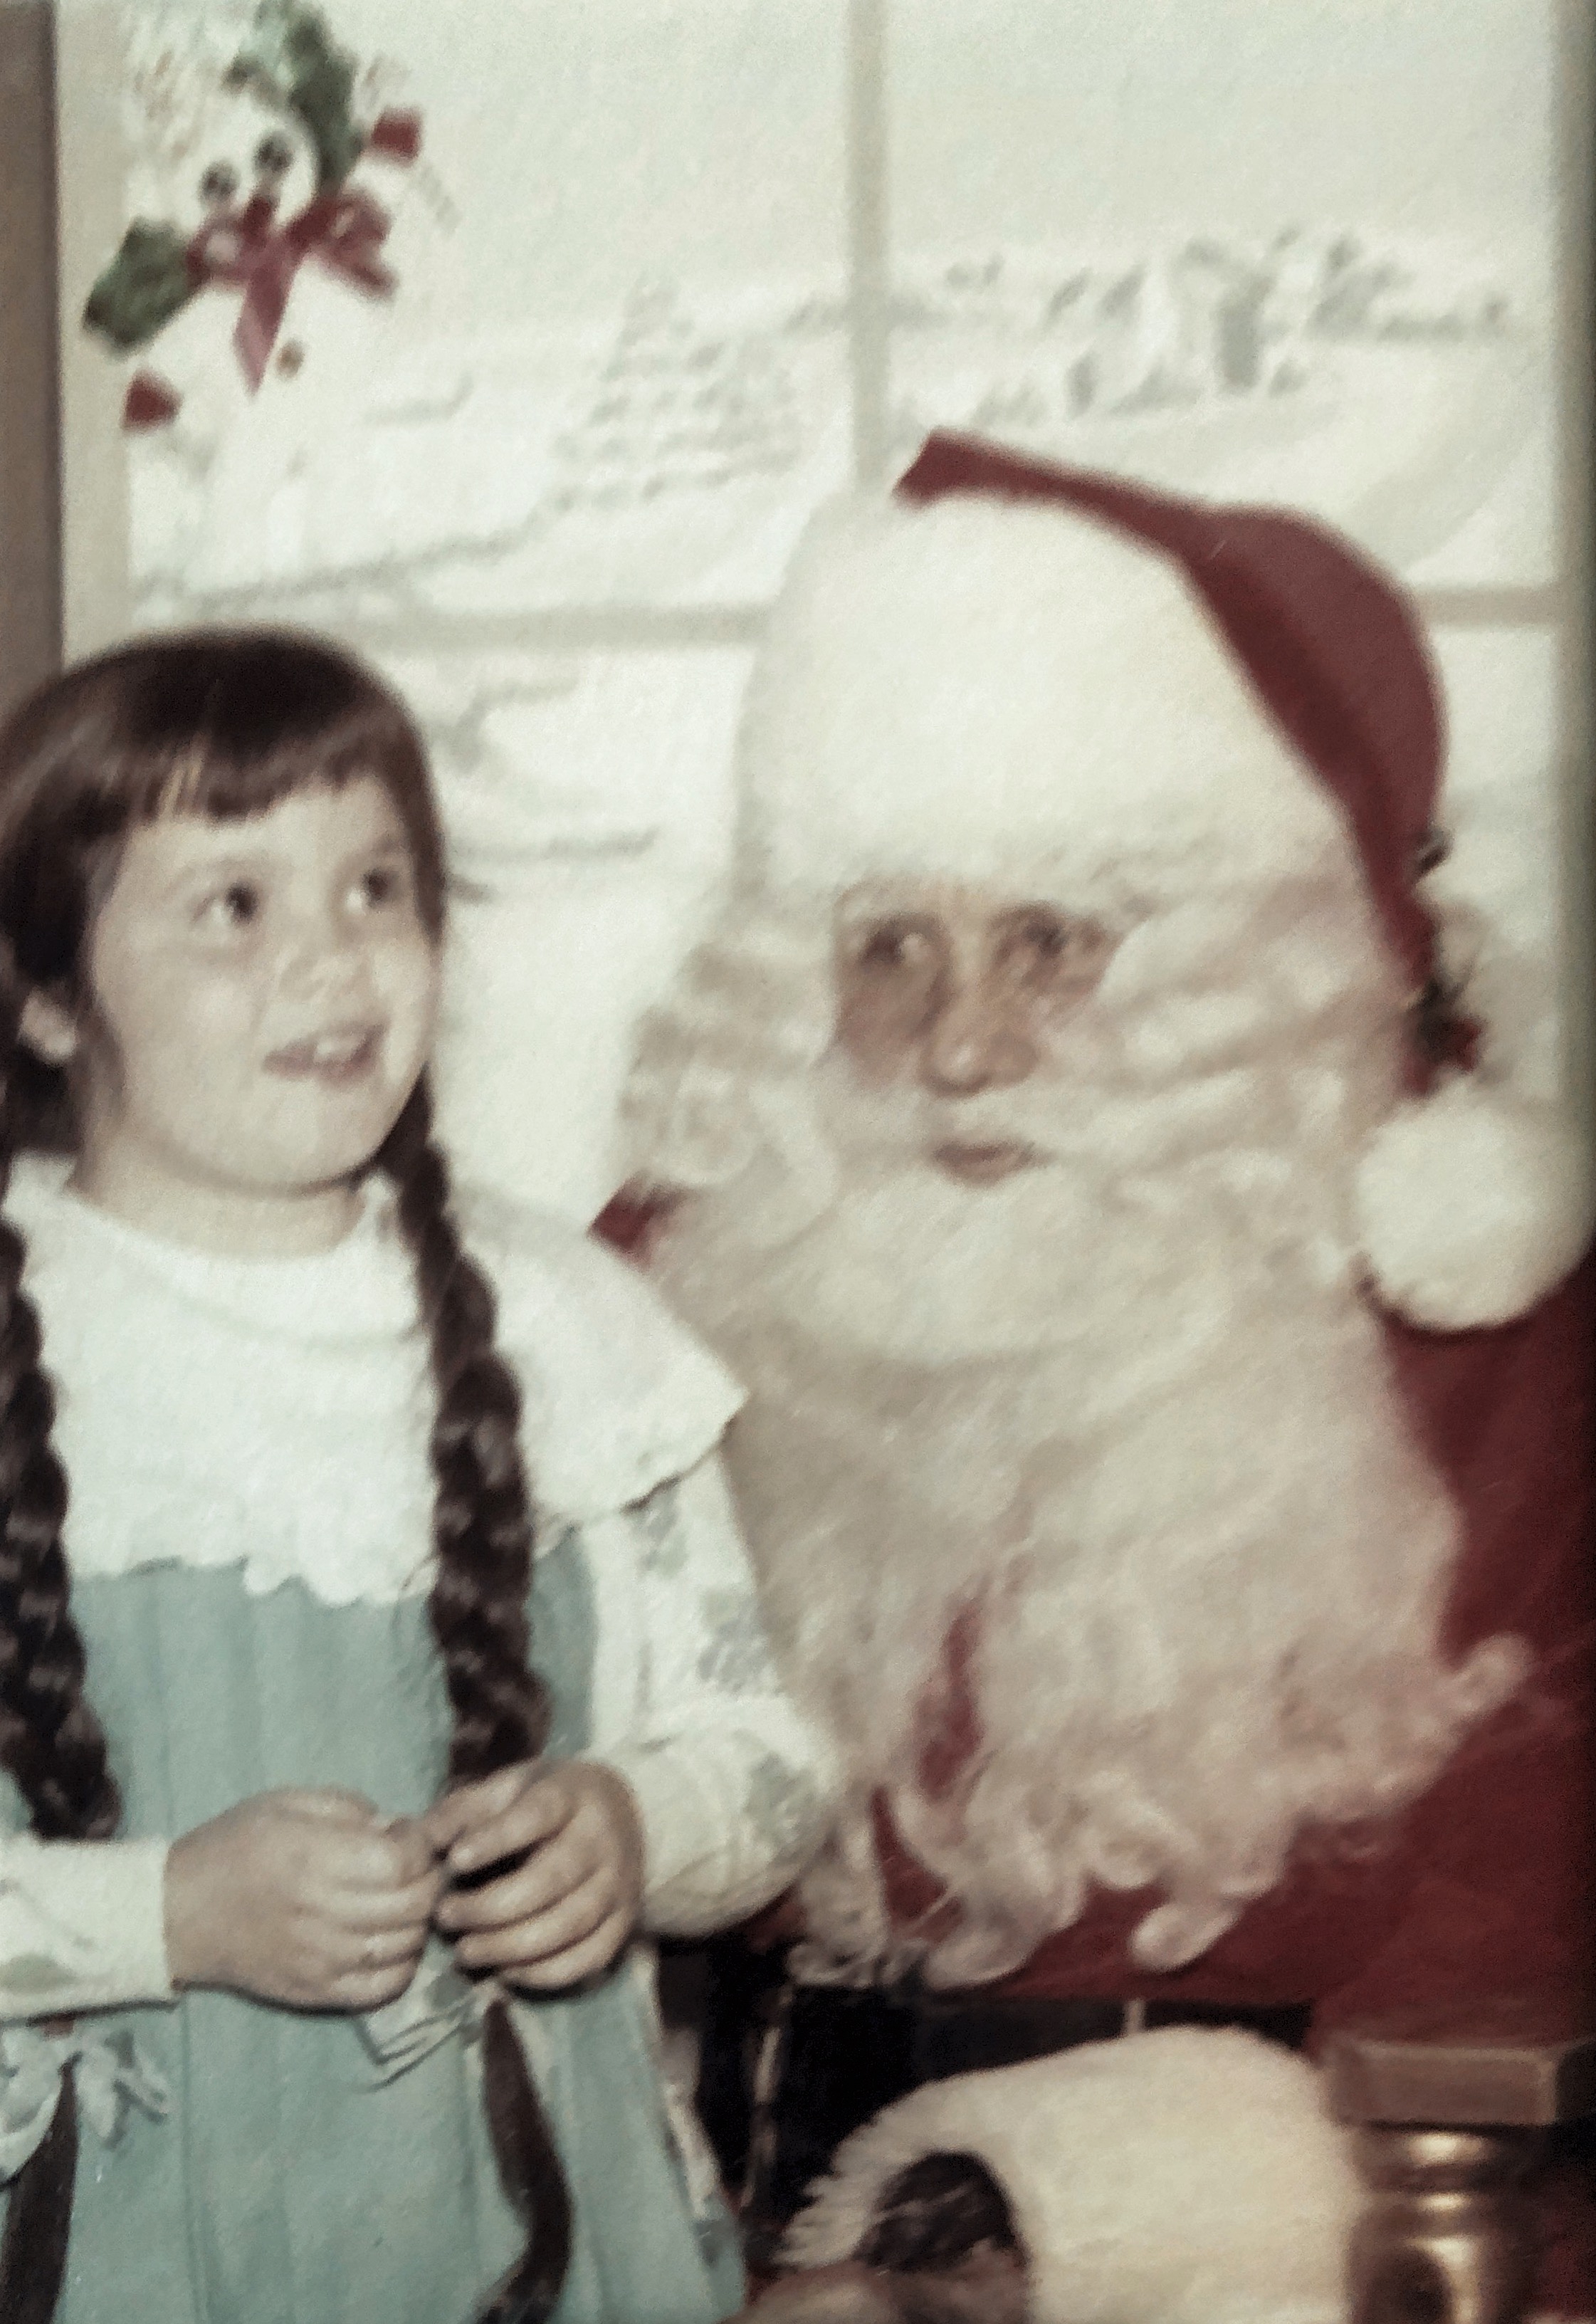 Esther and Santa seven years old in 1963